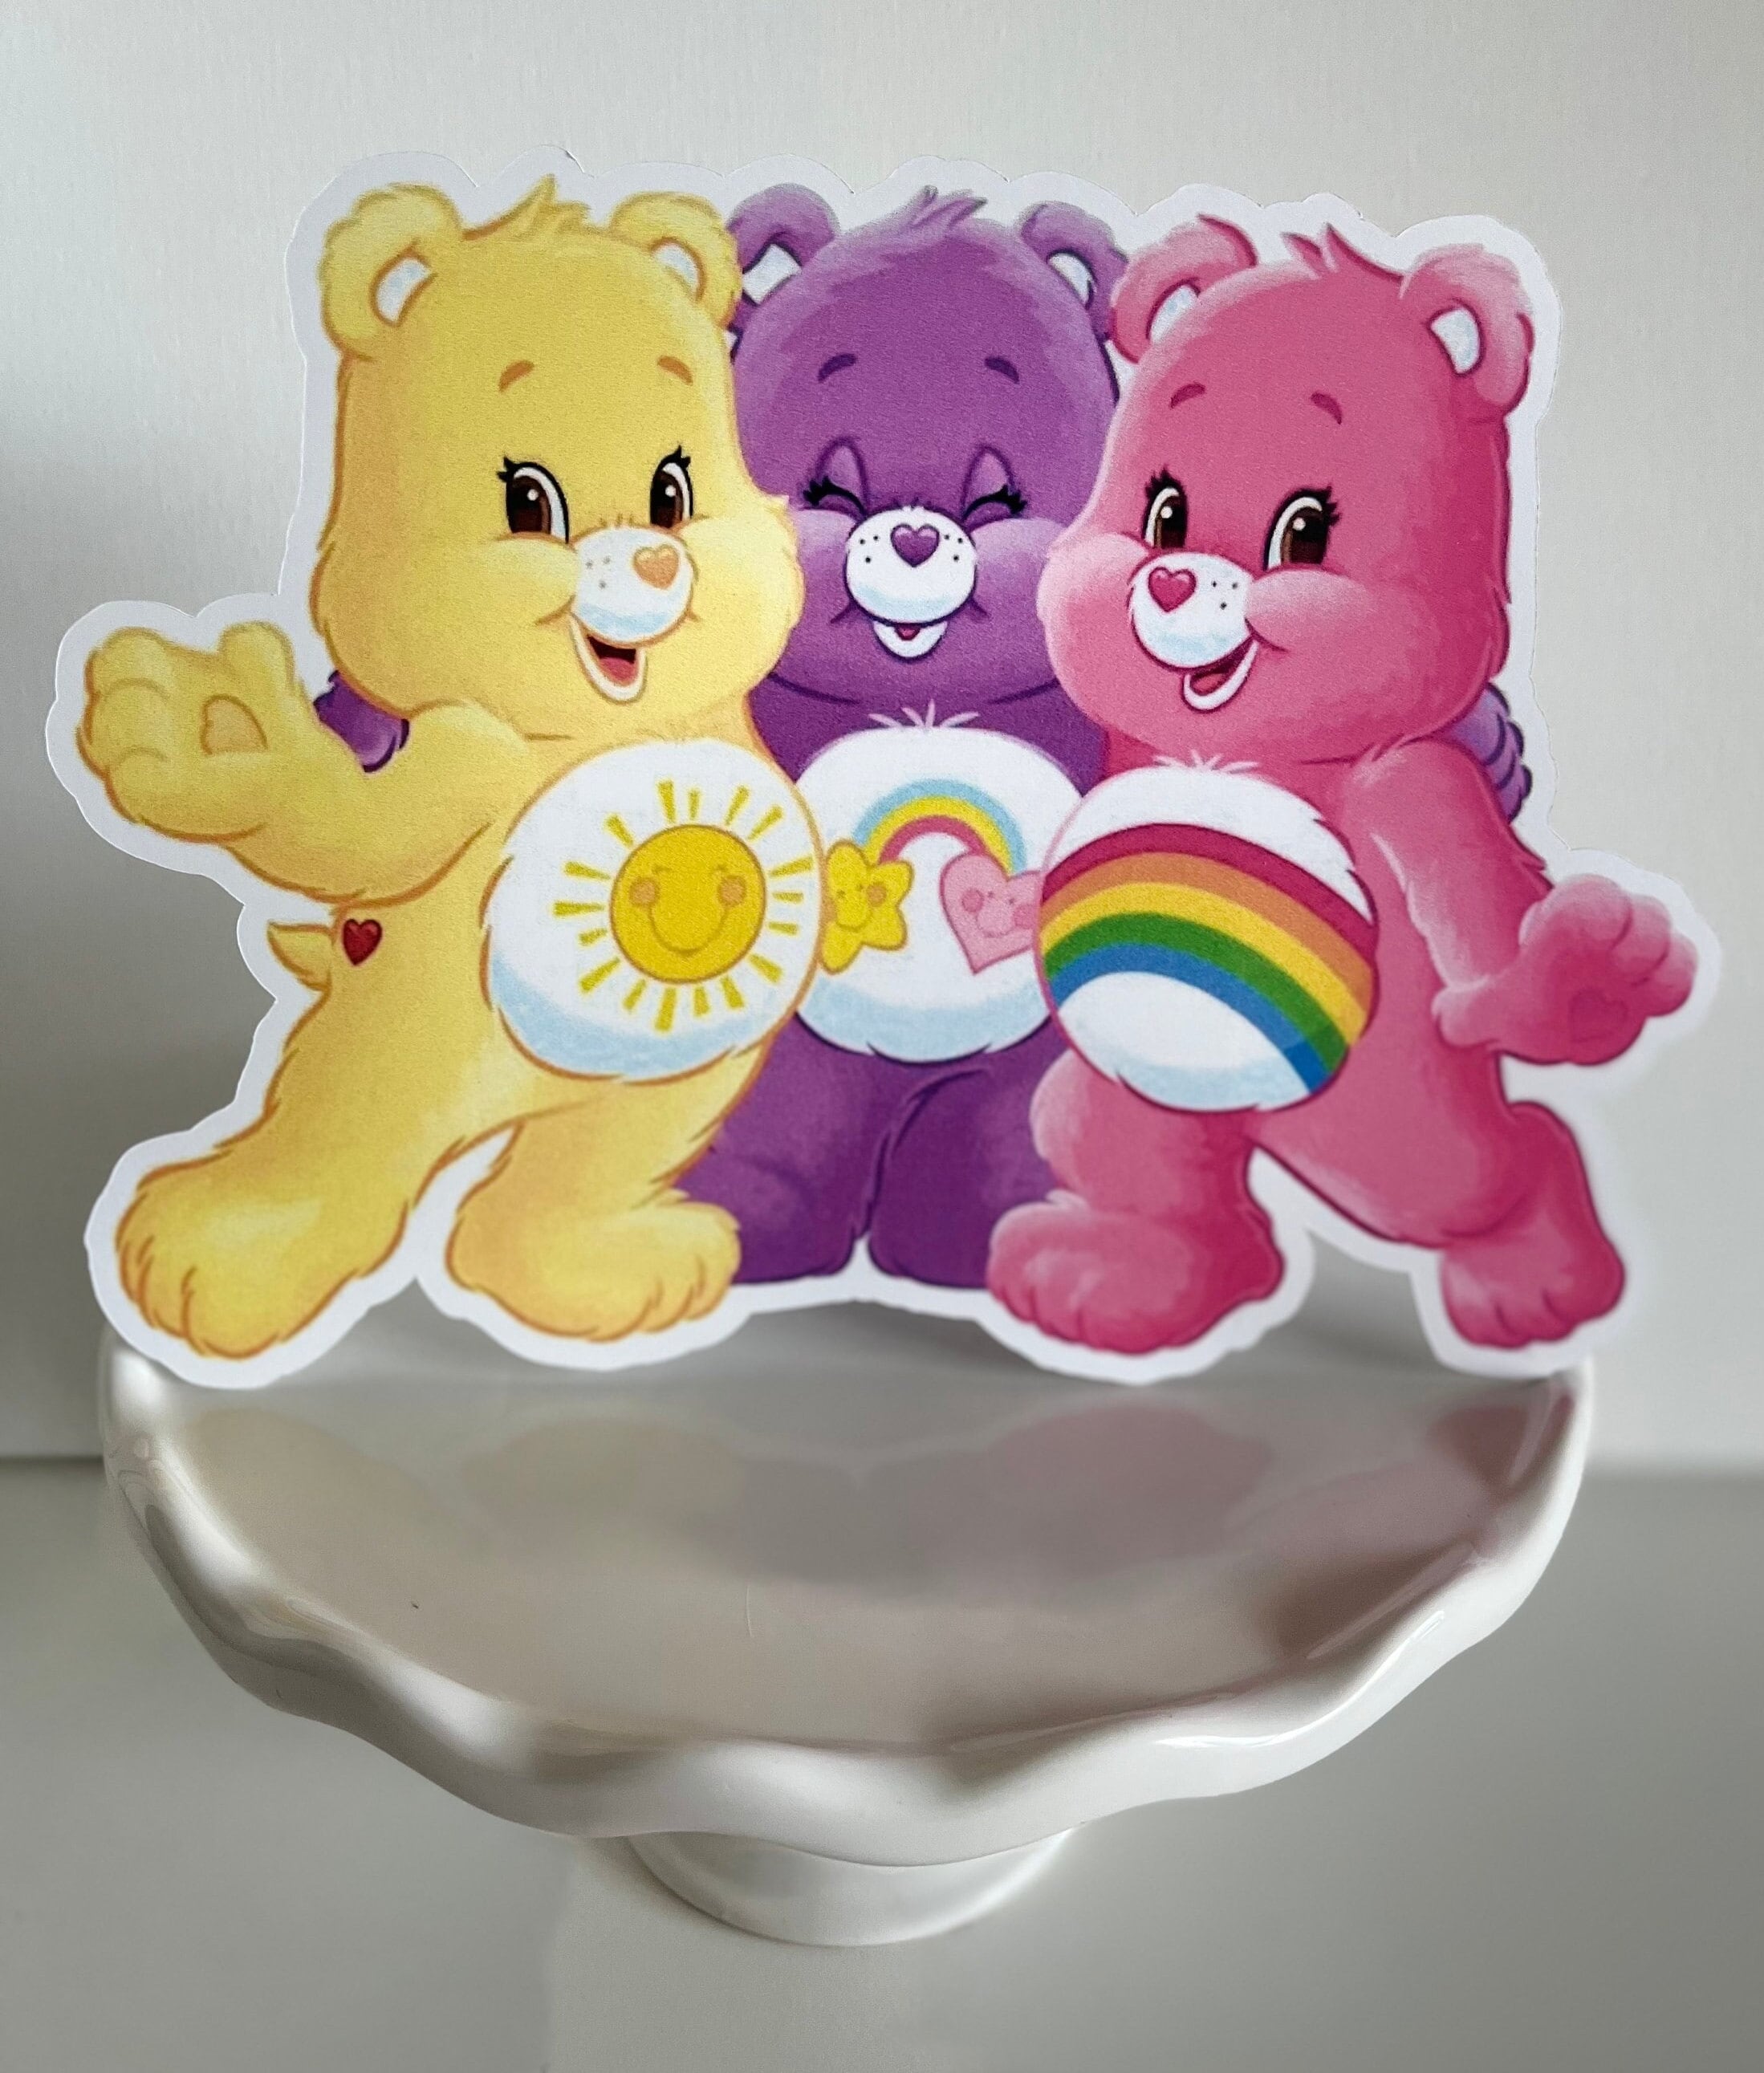 Care Bears Party Supplies - Kids Themed Party Supplies